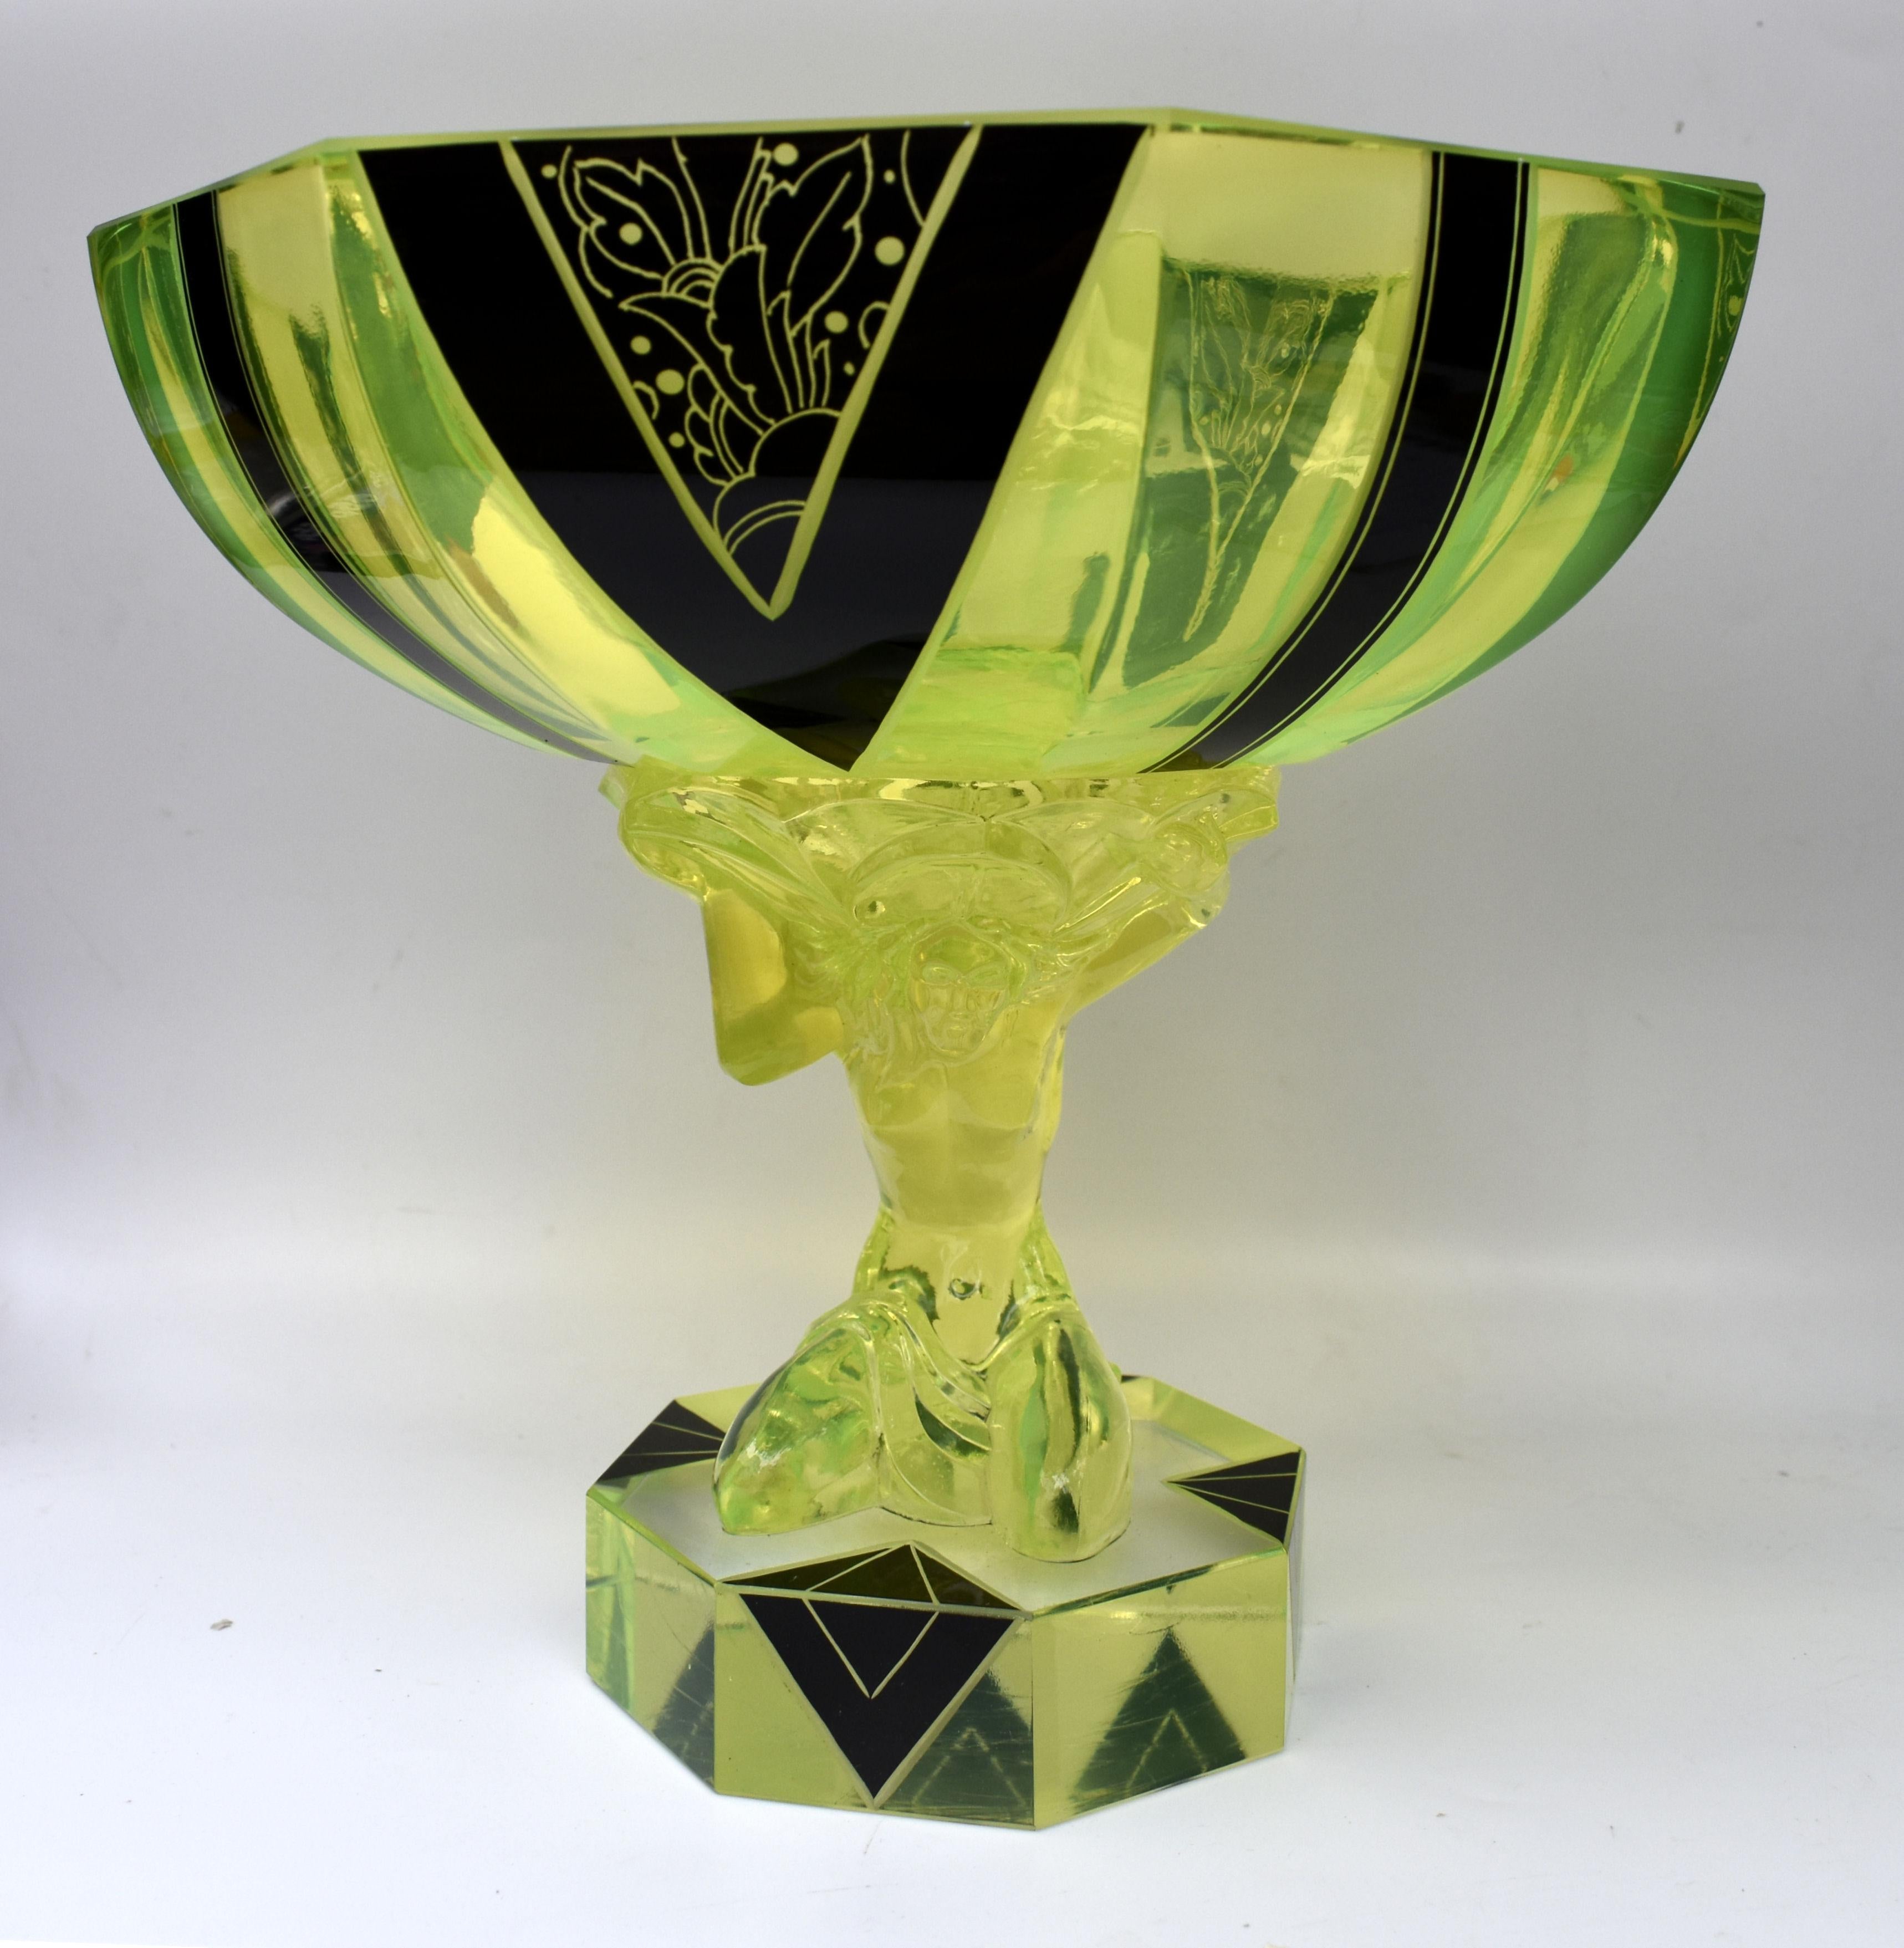 This is without doubt one of our all time favourite Art Deco comports. Originating from Czech republic and made by Karl Palda this comport packs two punches, not only visually with it's very distinctive green / yellow colouring and jet black enamel